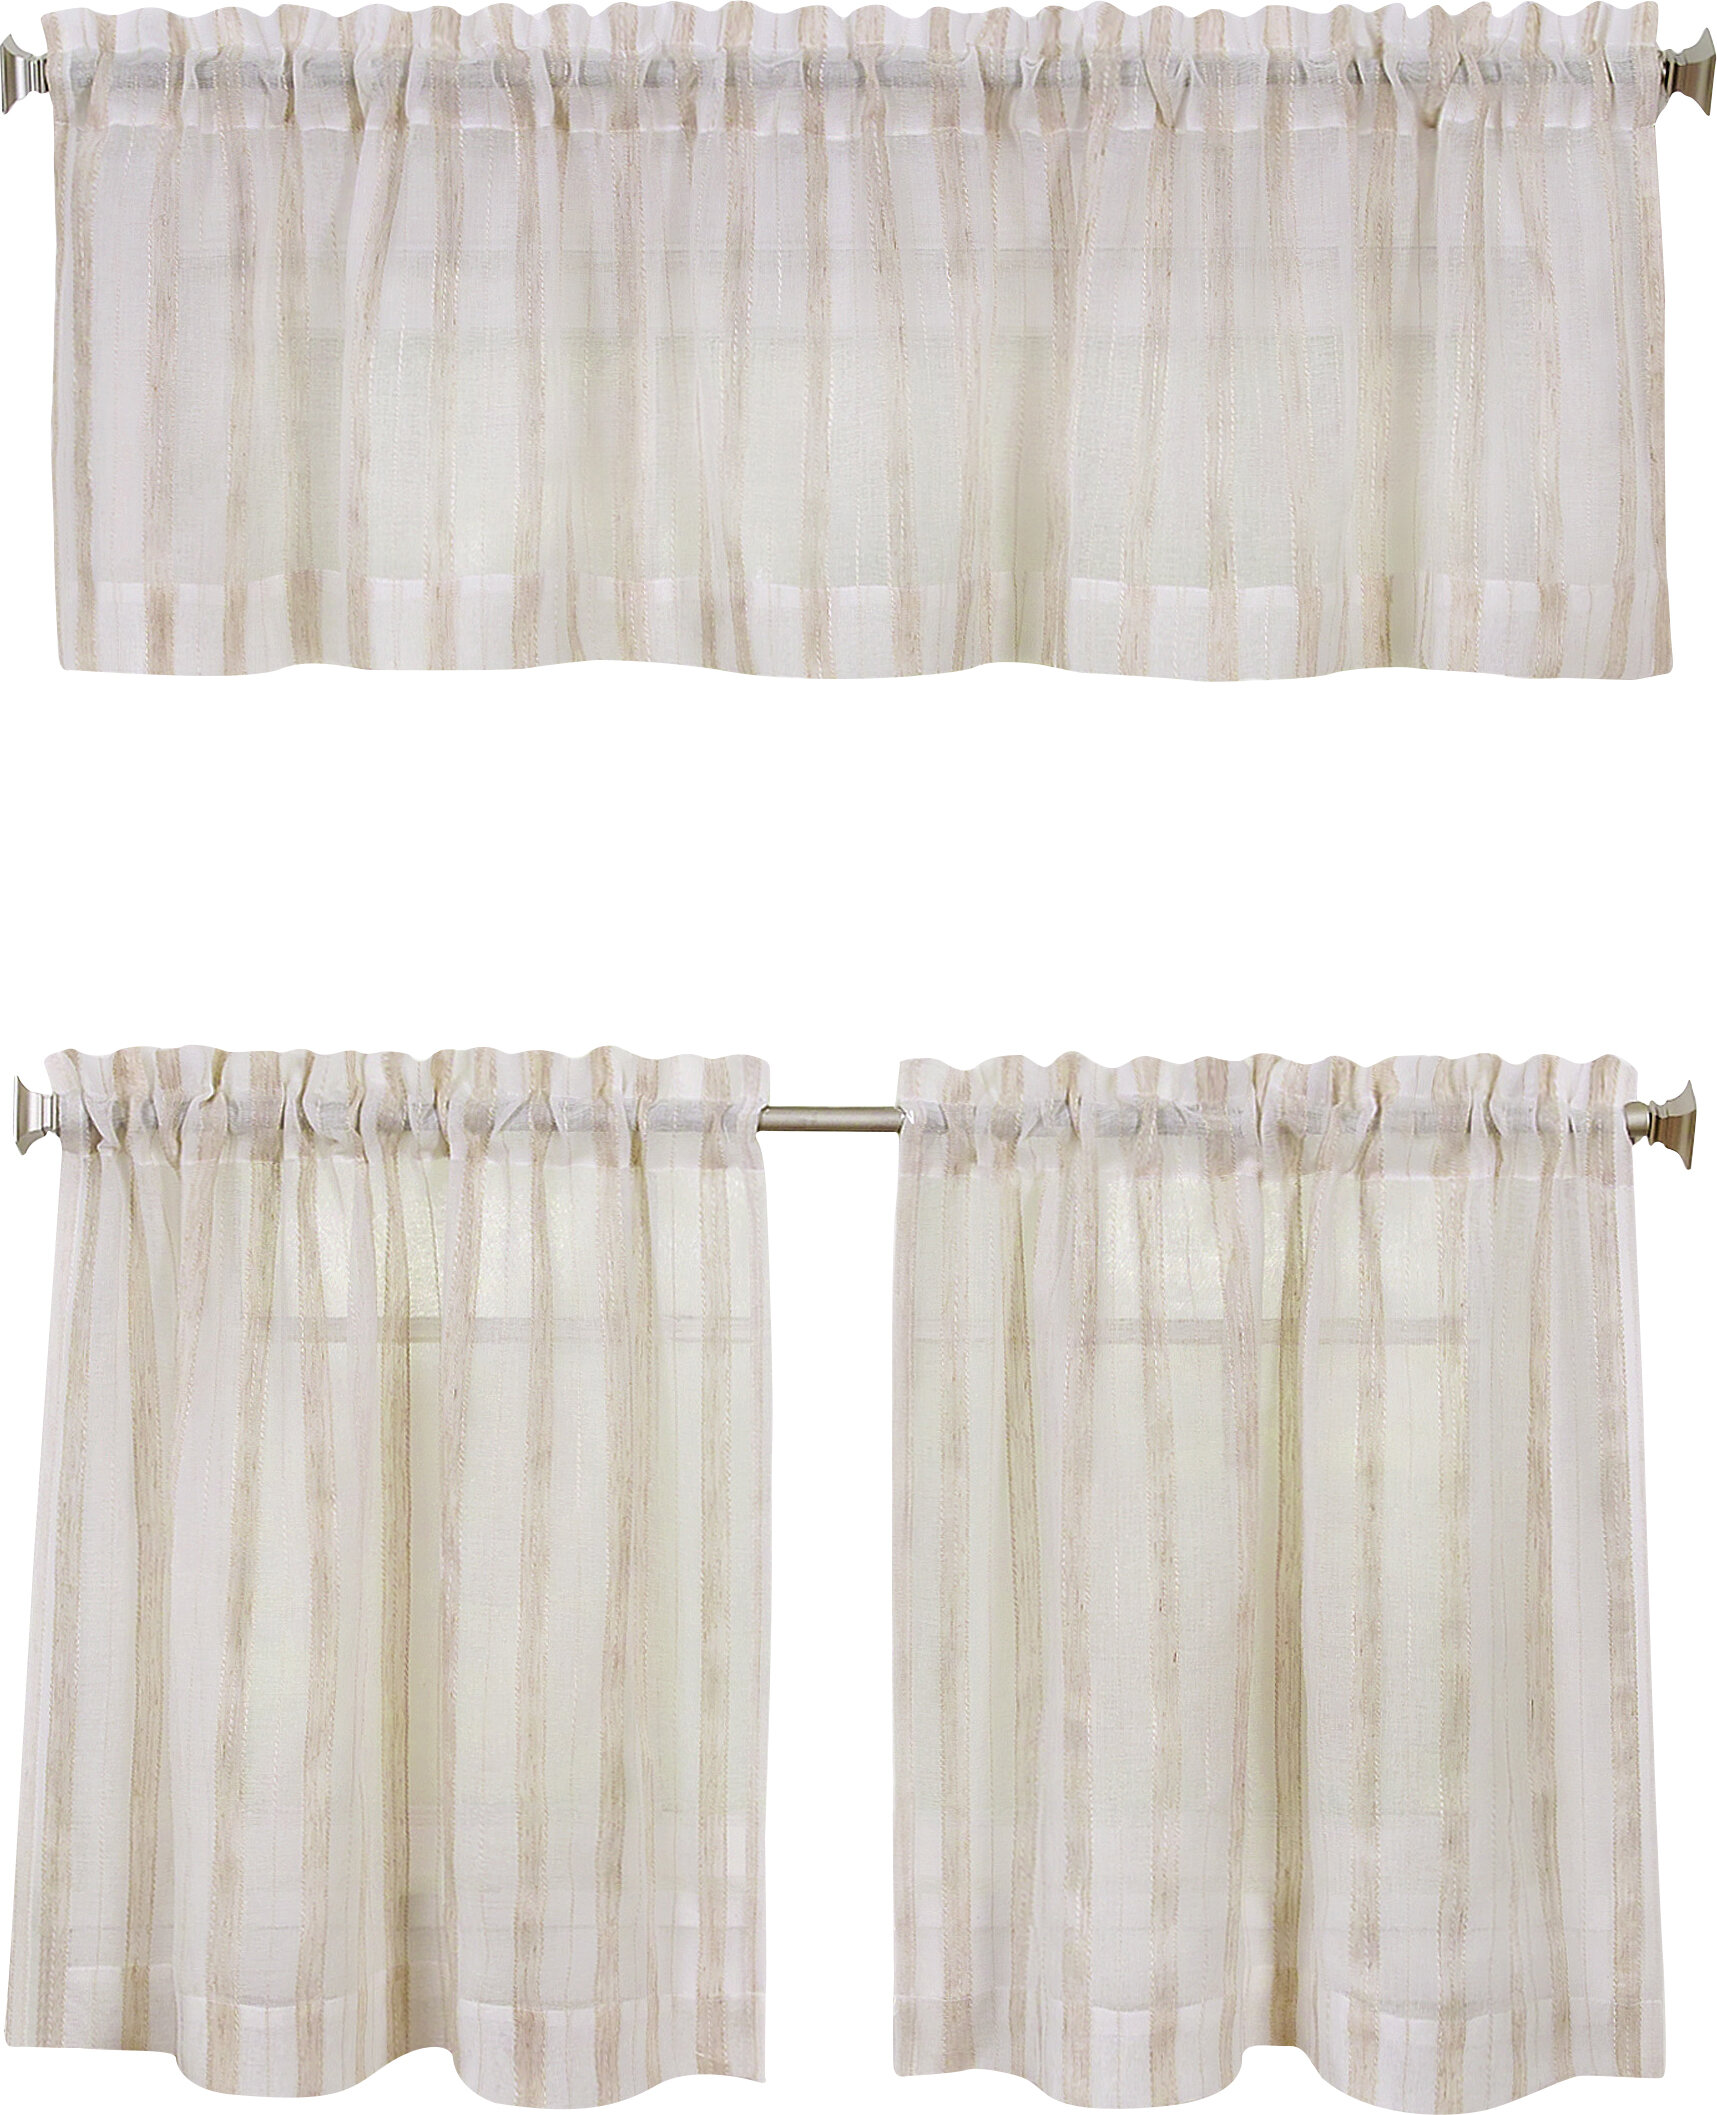 Lazzzy Kitchen Tier Curtains Casual Weave Textured Privacy Semi Sheer Window Treatment Set Grommet Curtains for Bedroom 1 Pair 45 Beige